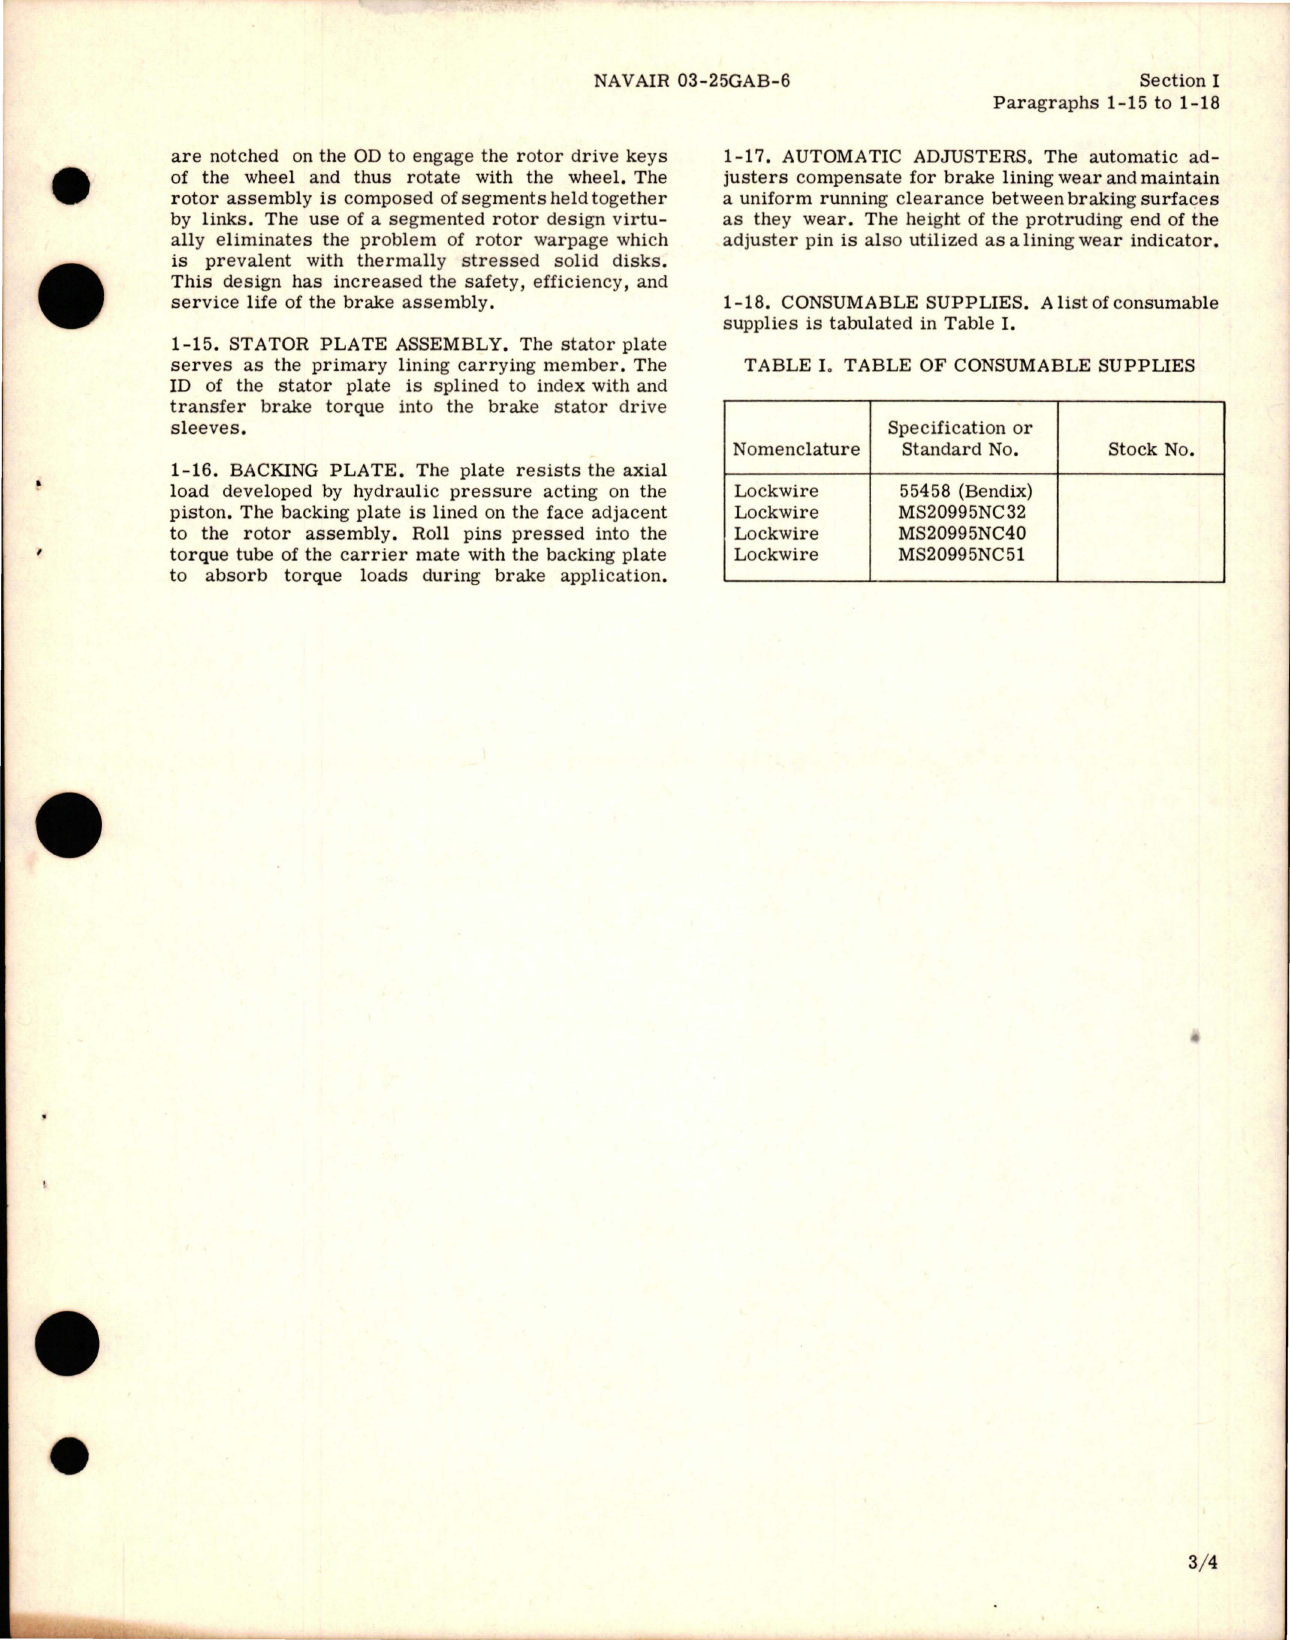 Sample page 7 from AirCorps Library document: Operation and Maintenance Instructions for Main Landing Gear Brake Assemblies